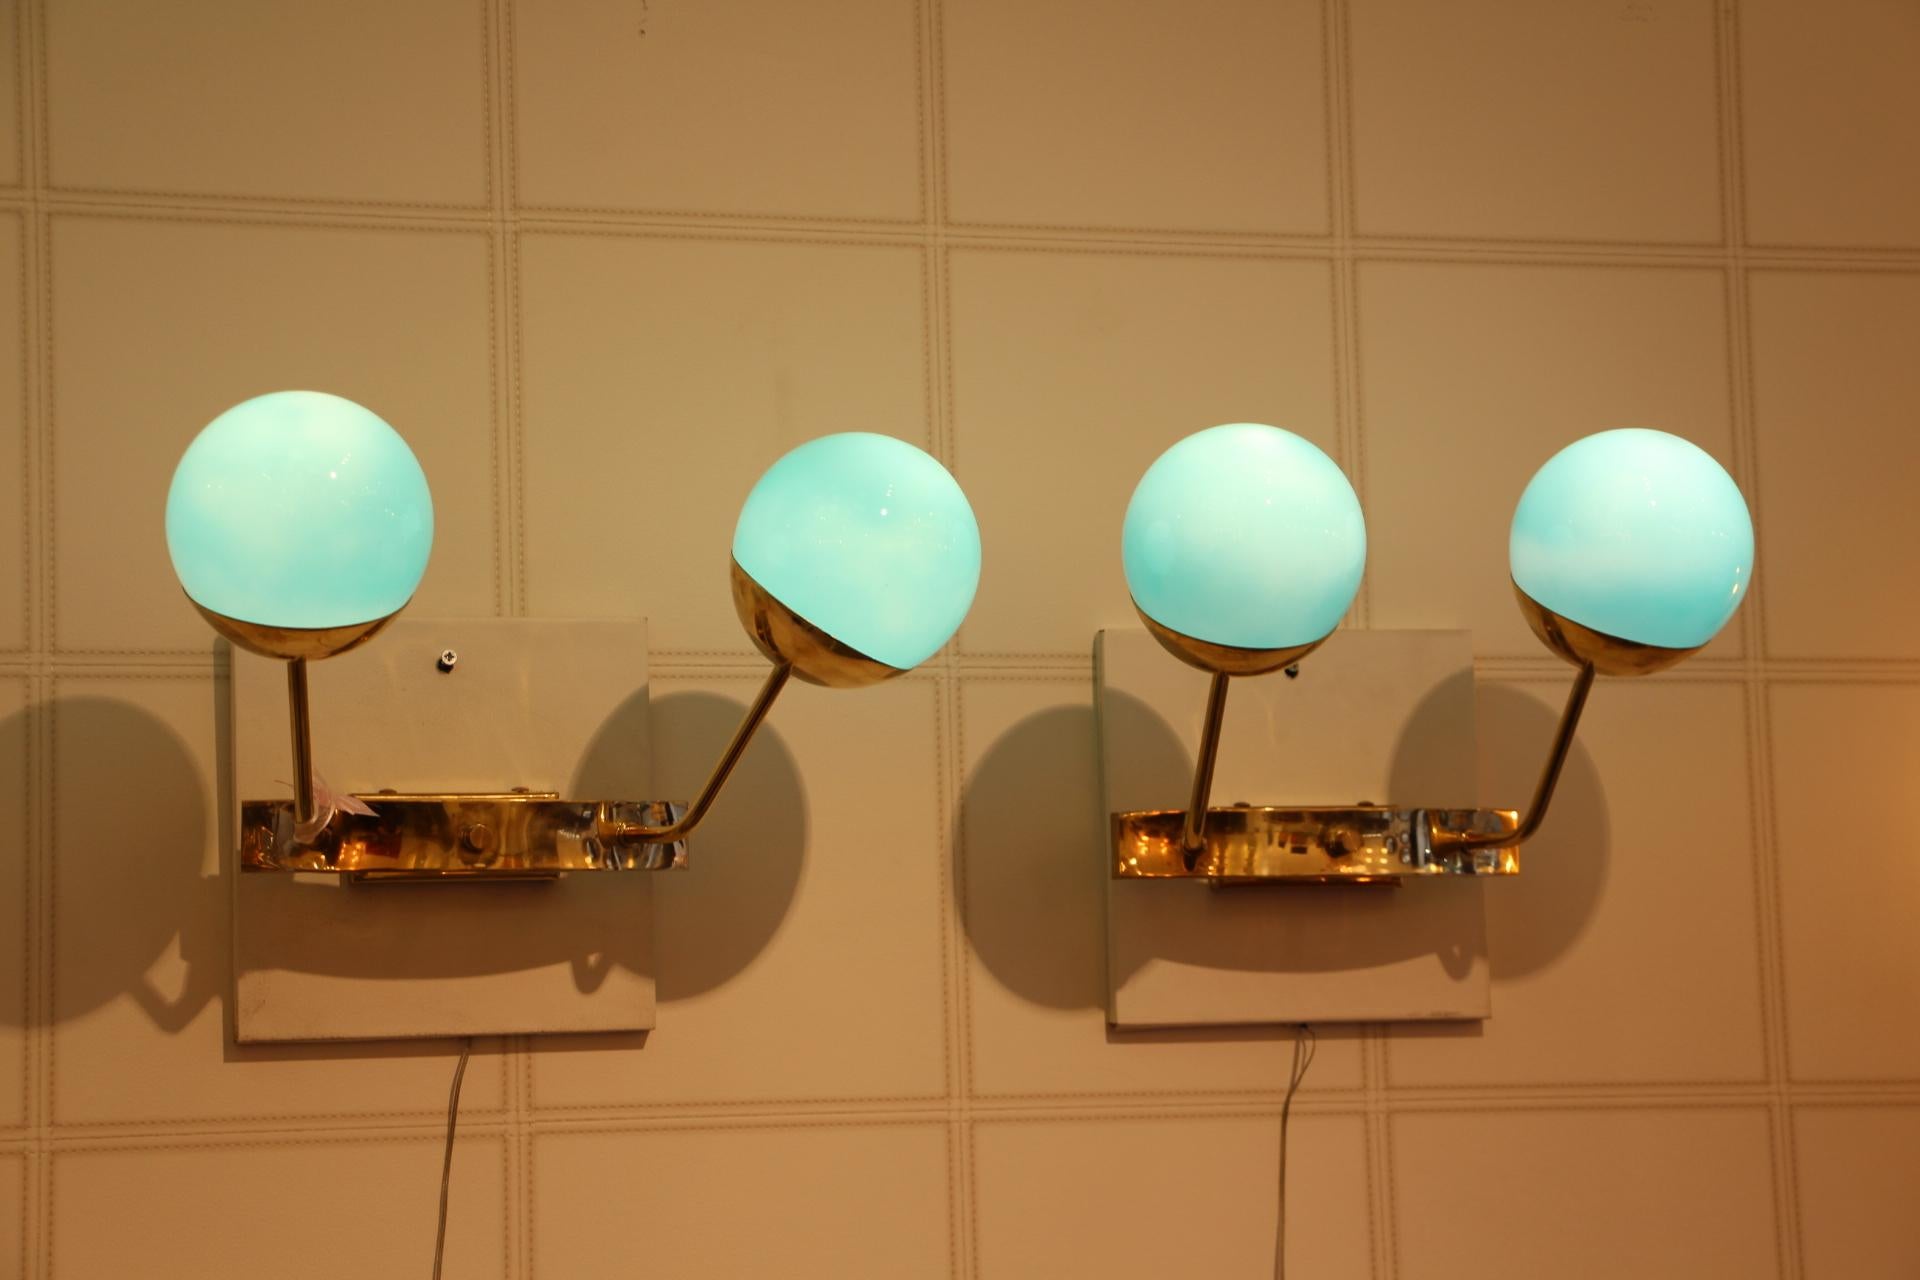 Very elegant pair of sconces in brass and 2 turquoise blue Murano glass globes.
When light is on, the globes become sky blue color.